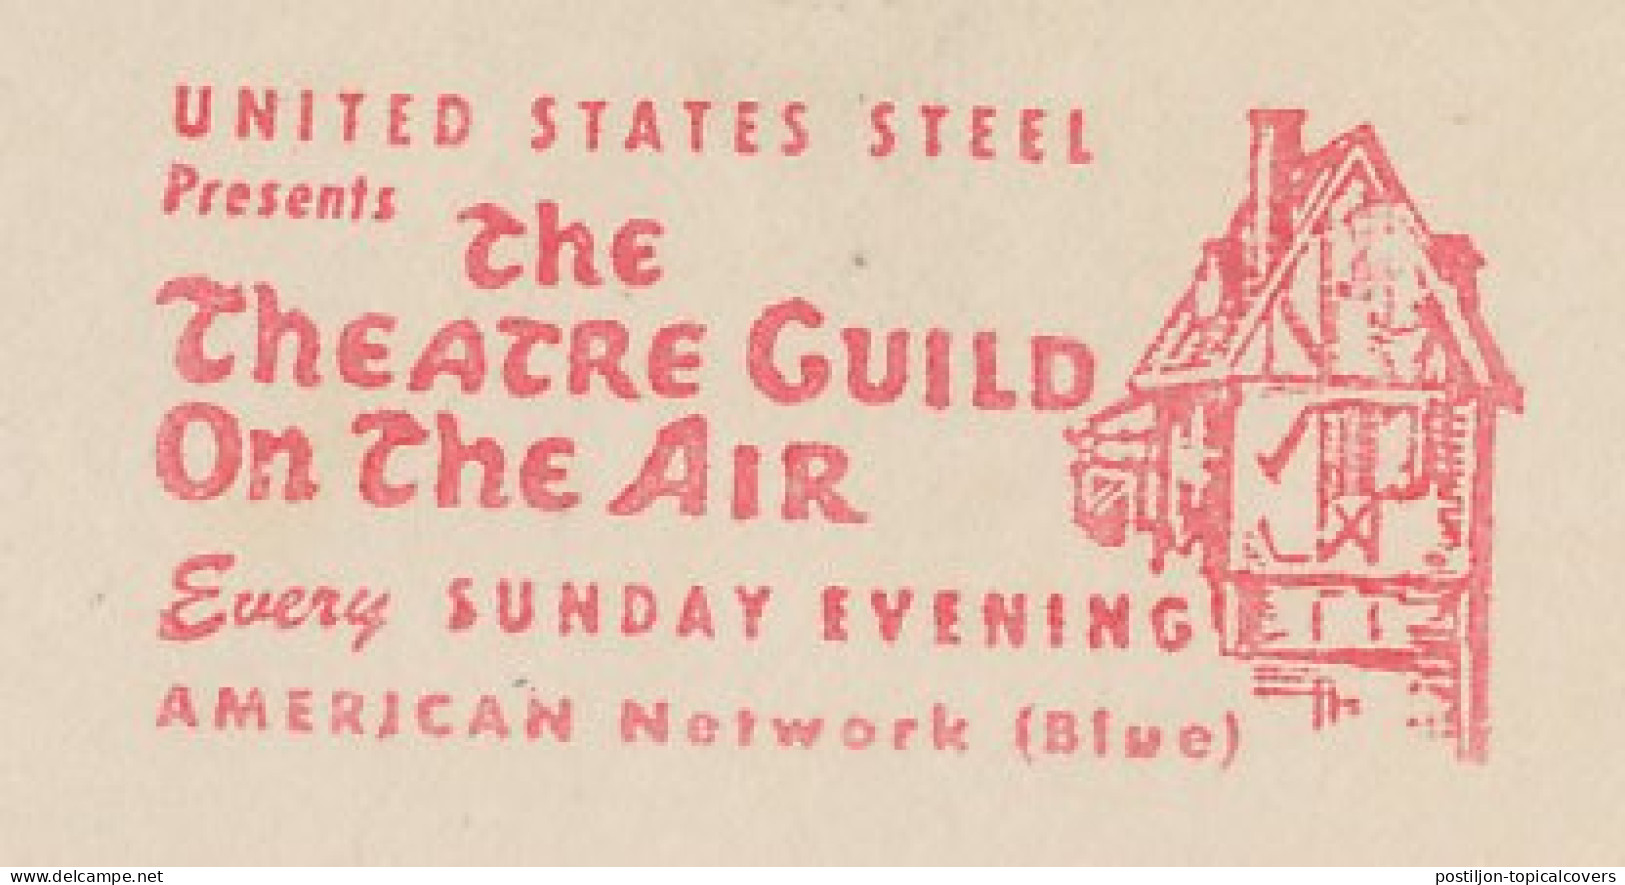 Meter Top Cut USA 1945 Radio - The Theatre Guild On The Air - Ohne Zuordnung